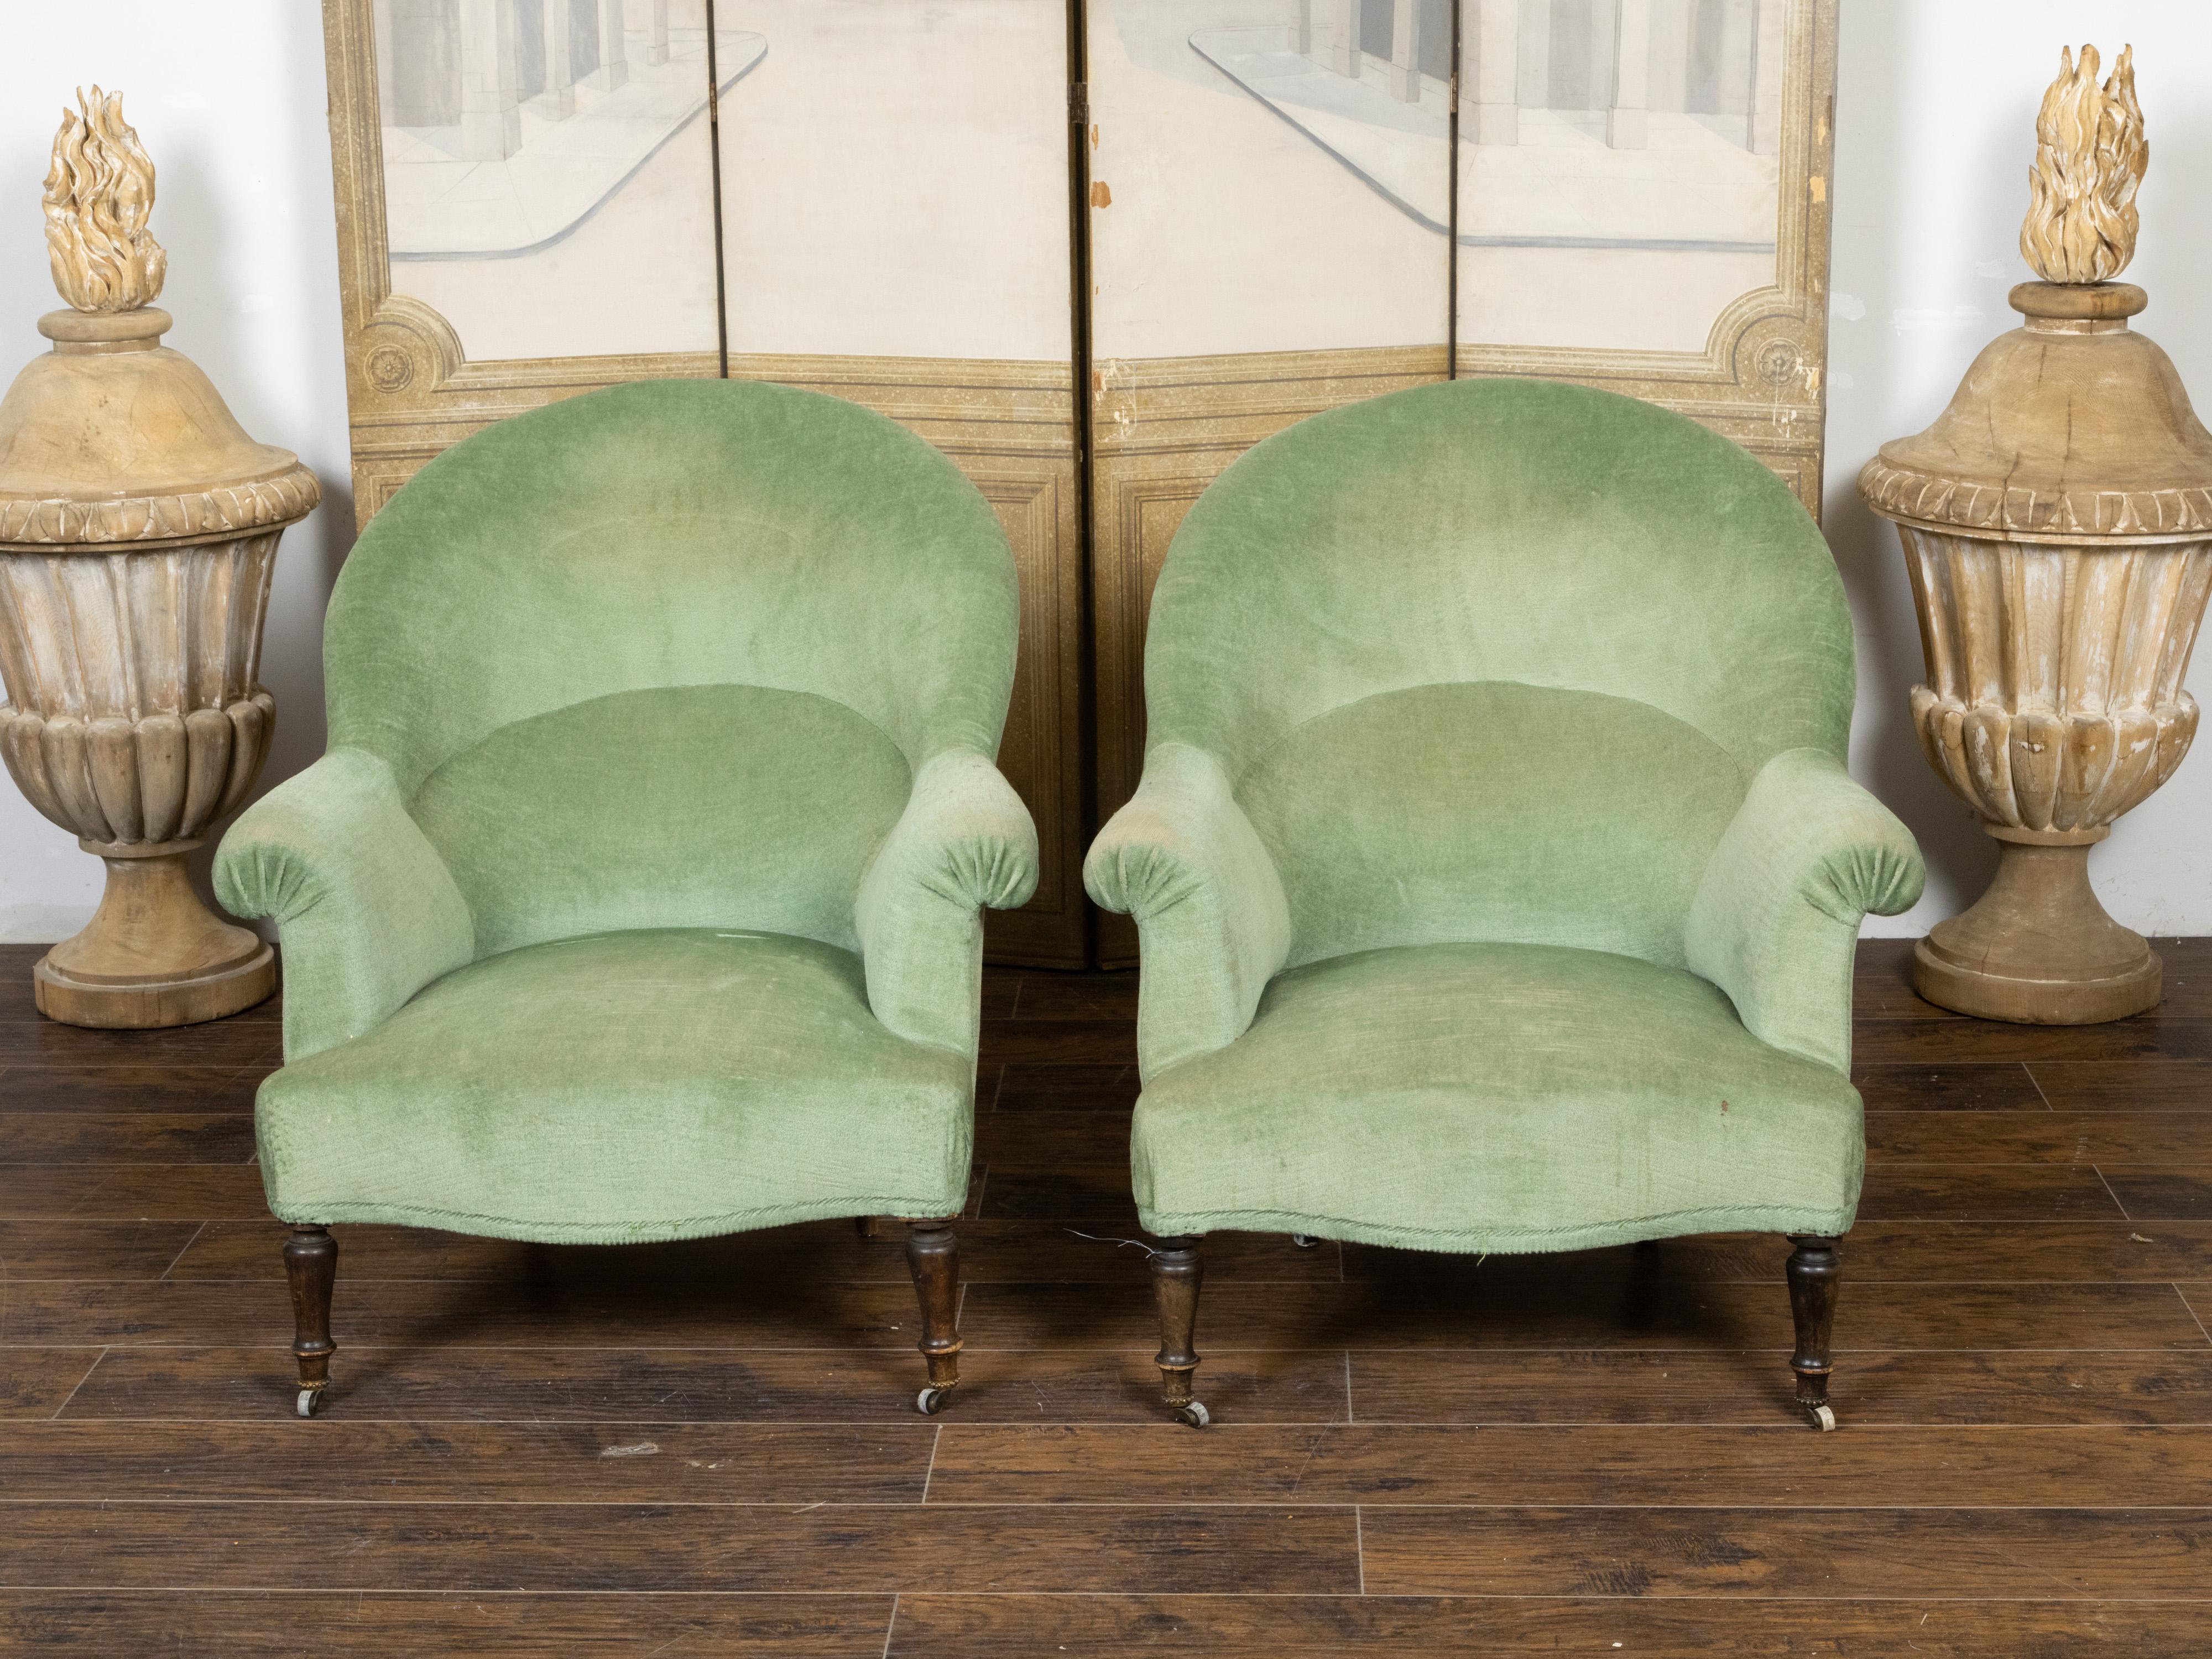 Turned Pair of French Turn of the Century Bergère Chairs with Green Velvet Upholstery For Sale